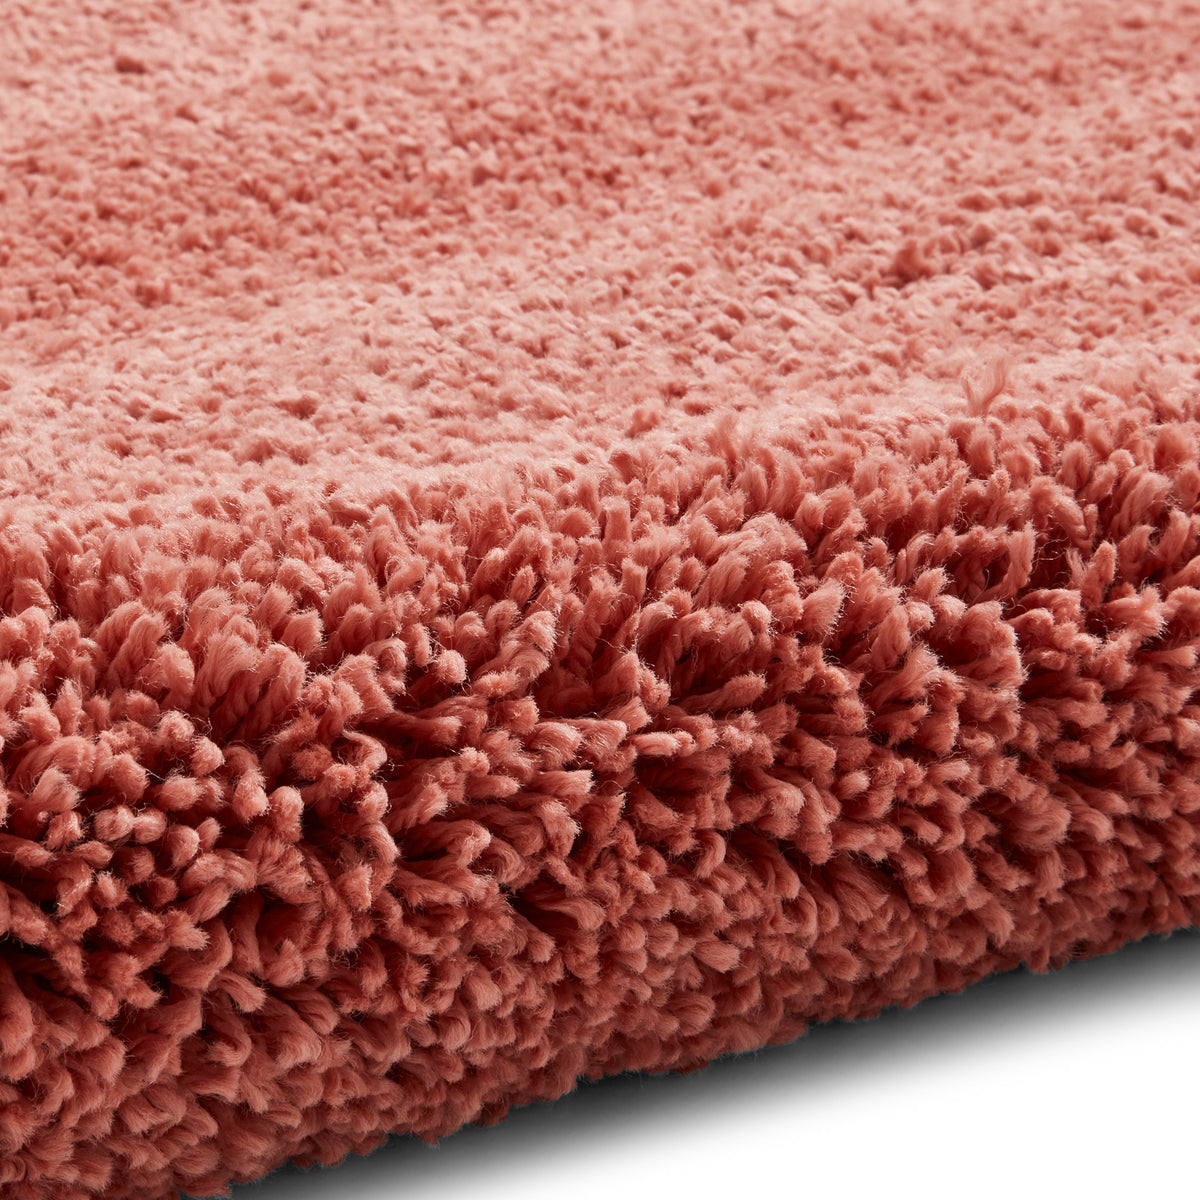 Roswell Pastel Peach Stain Resistant Shaggy Rug 